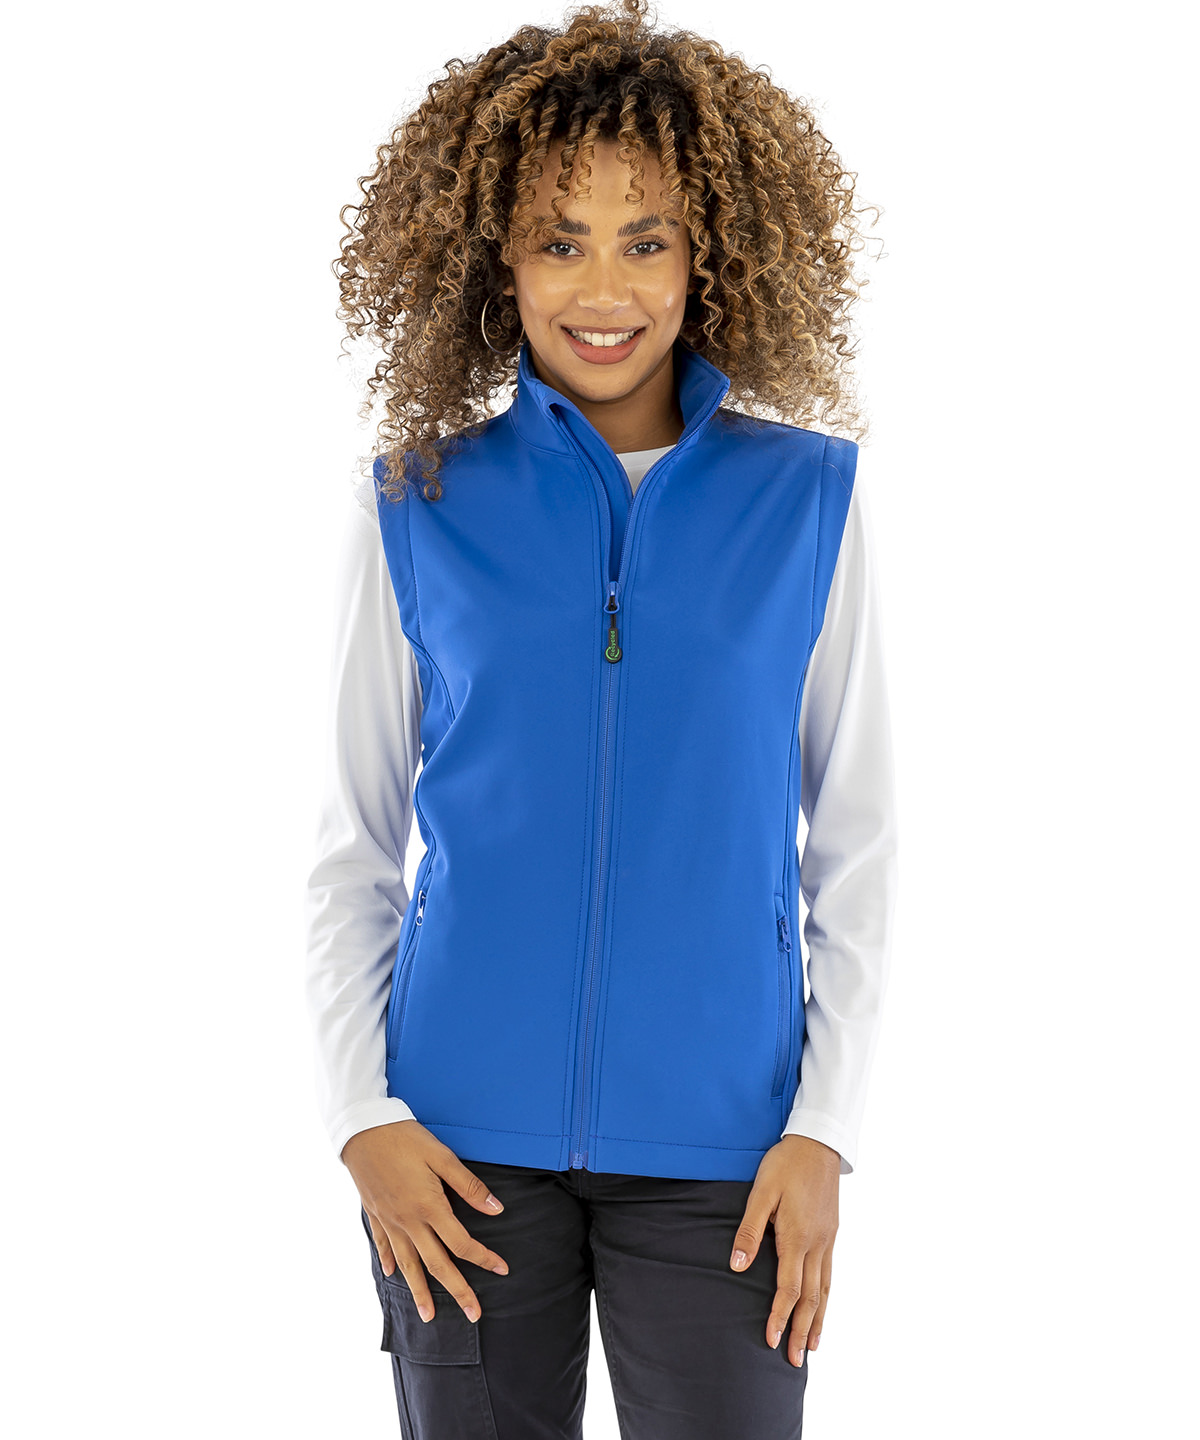 Women's recycled 2-layer printable softshell bodywarmer